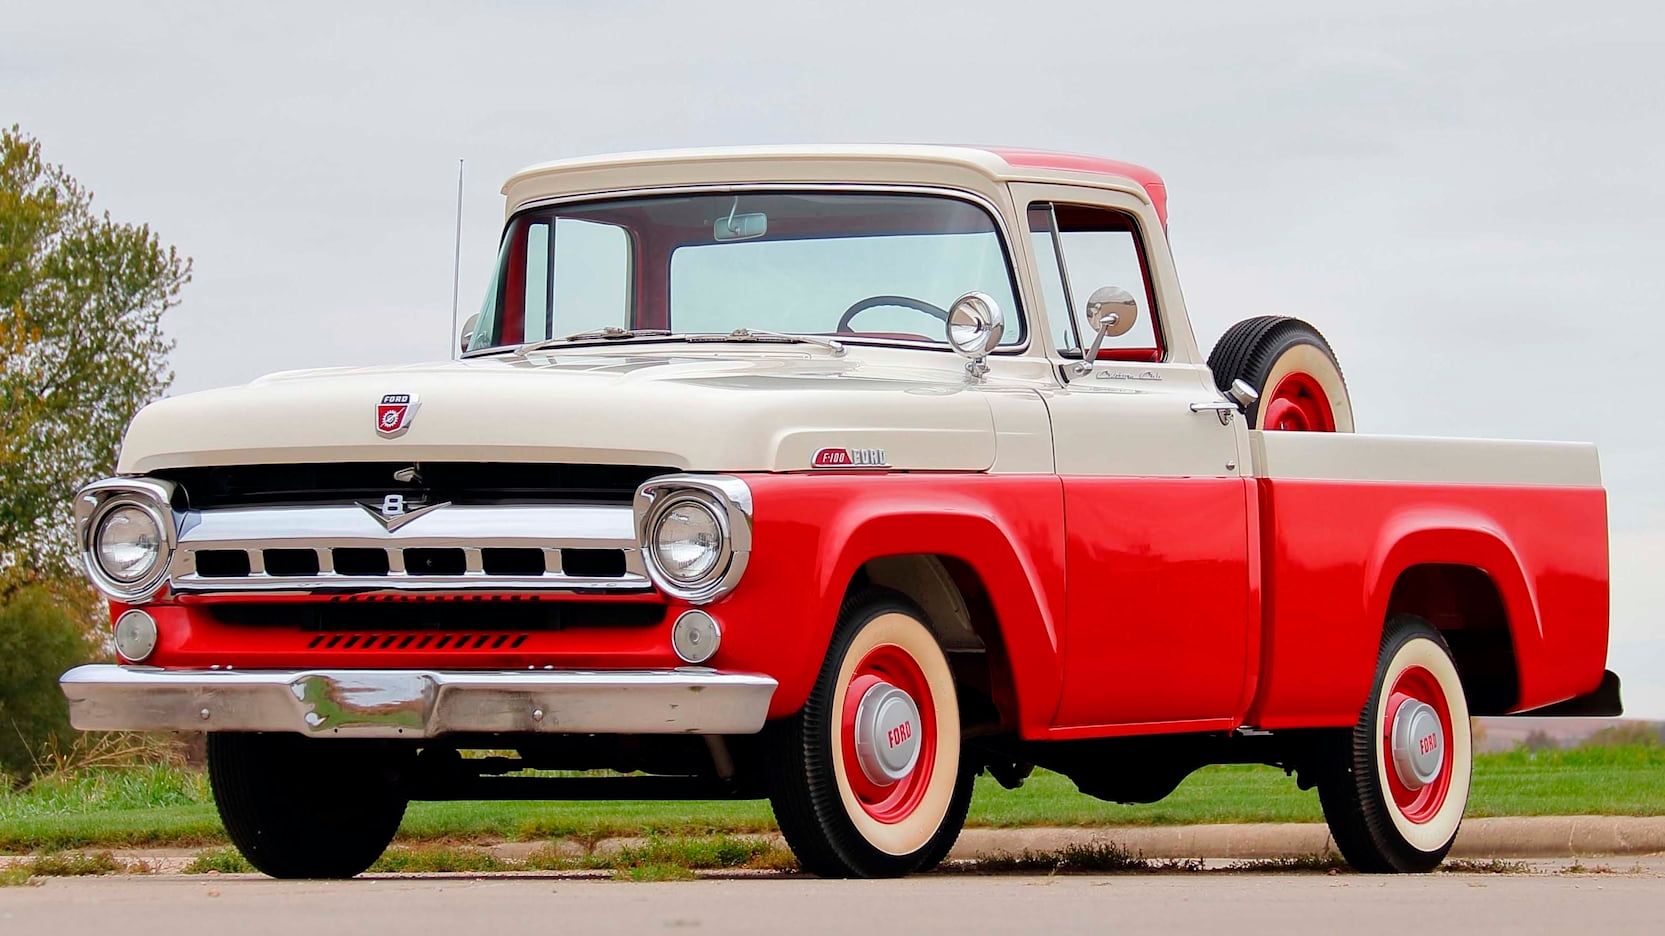 A parked red and white Ford F100